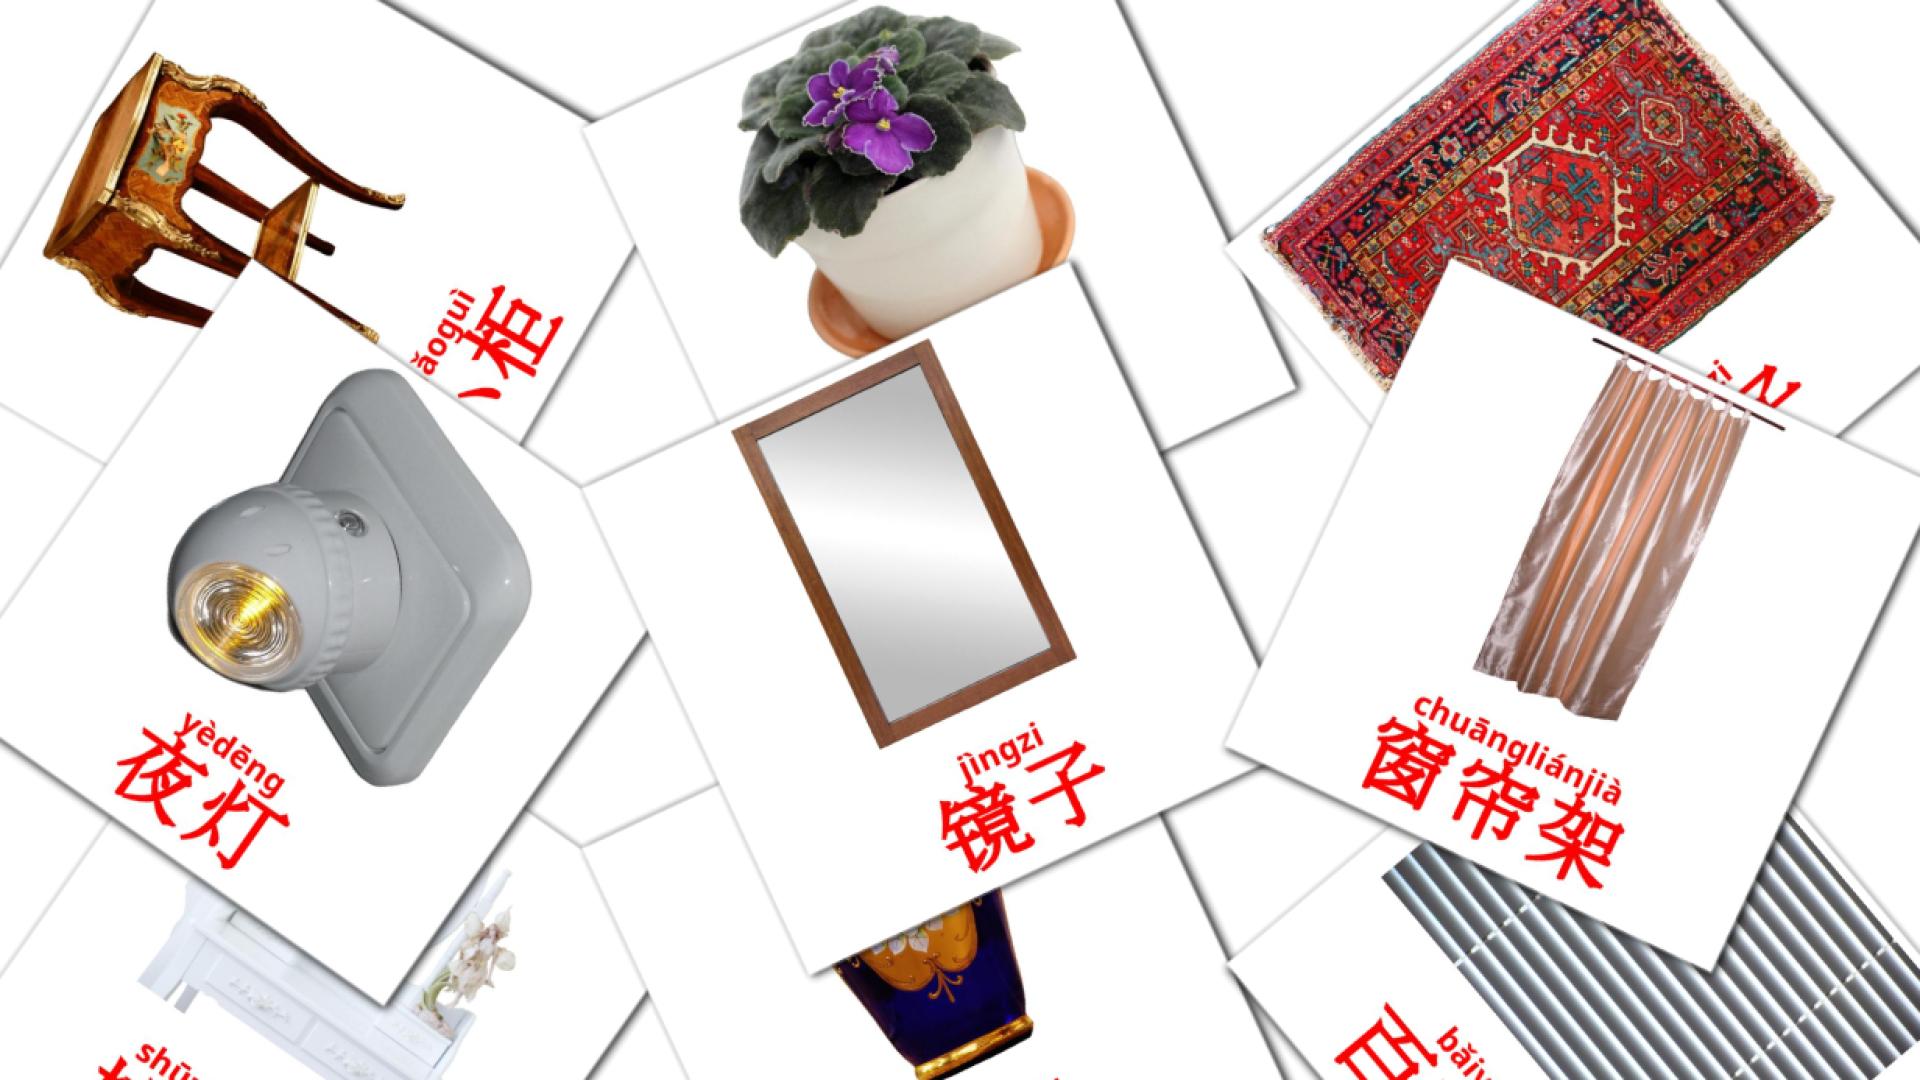 Bedroom accessories - chinese(Simplified) vocabulary cards